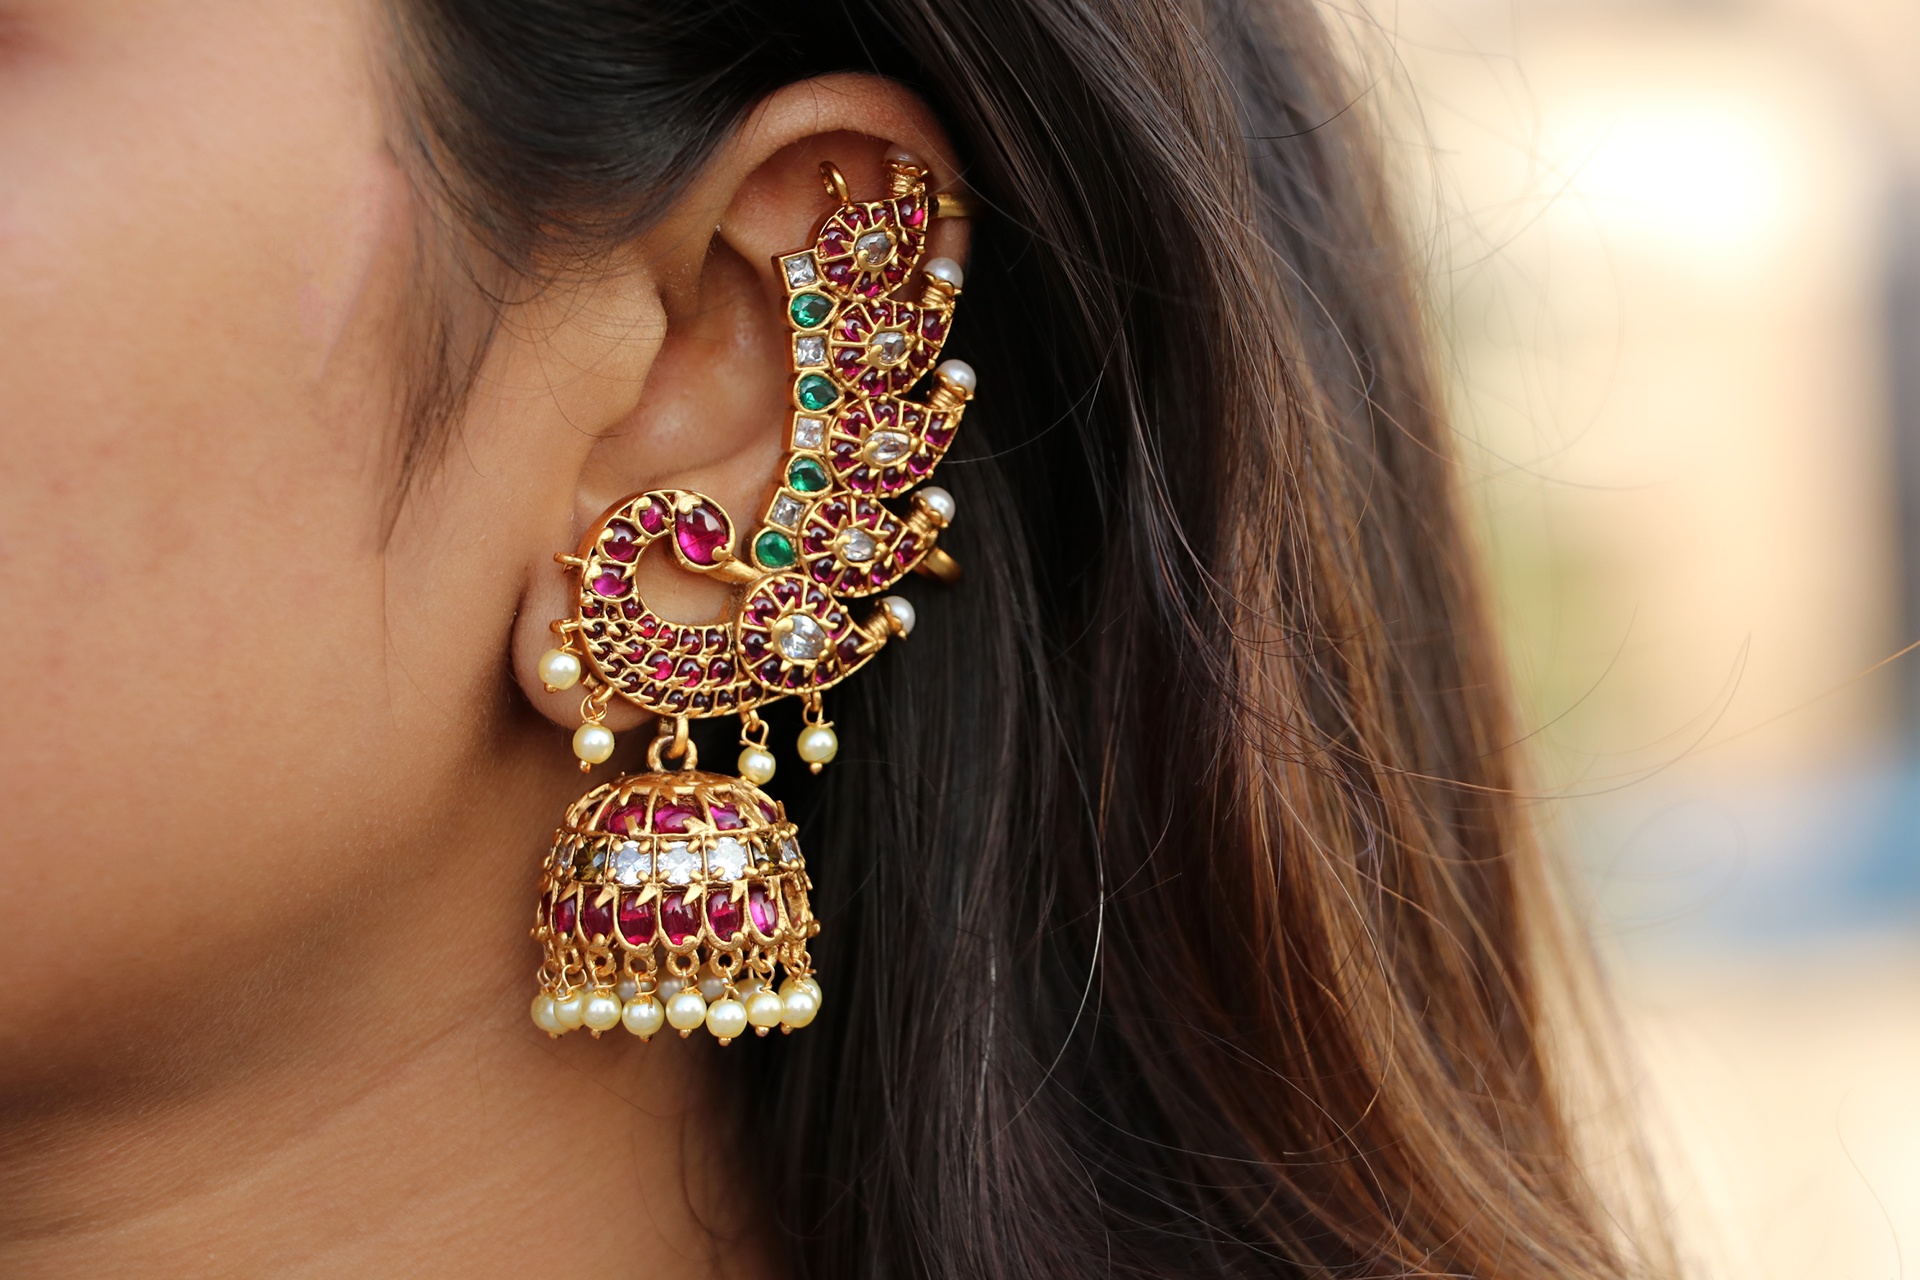 Best Traditional Jewellery For All Your Ethnic Outfits Are Here!